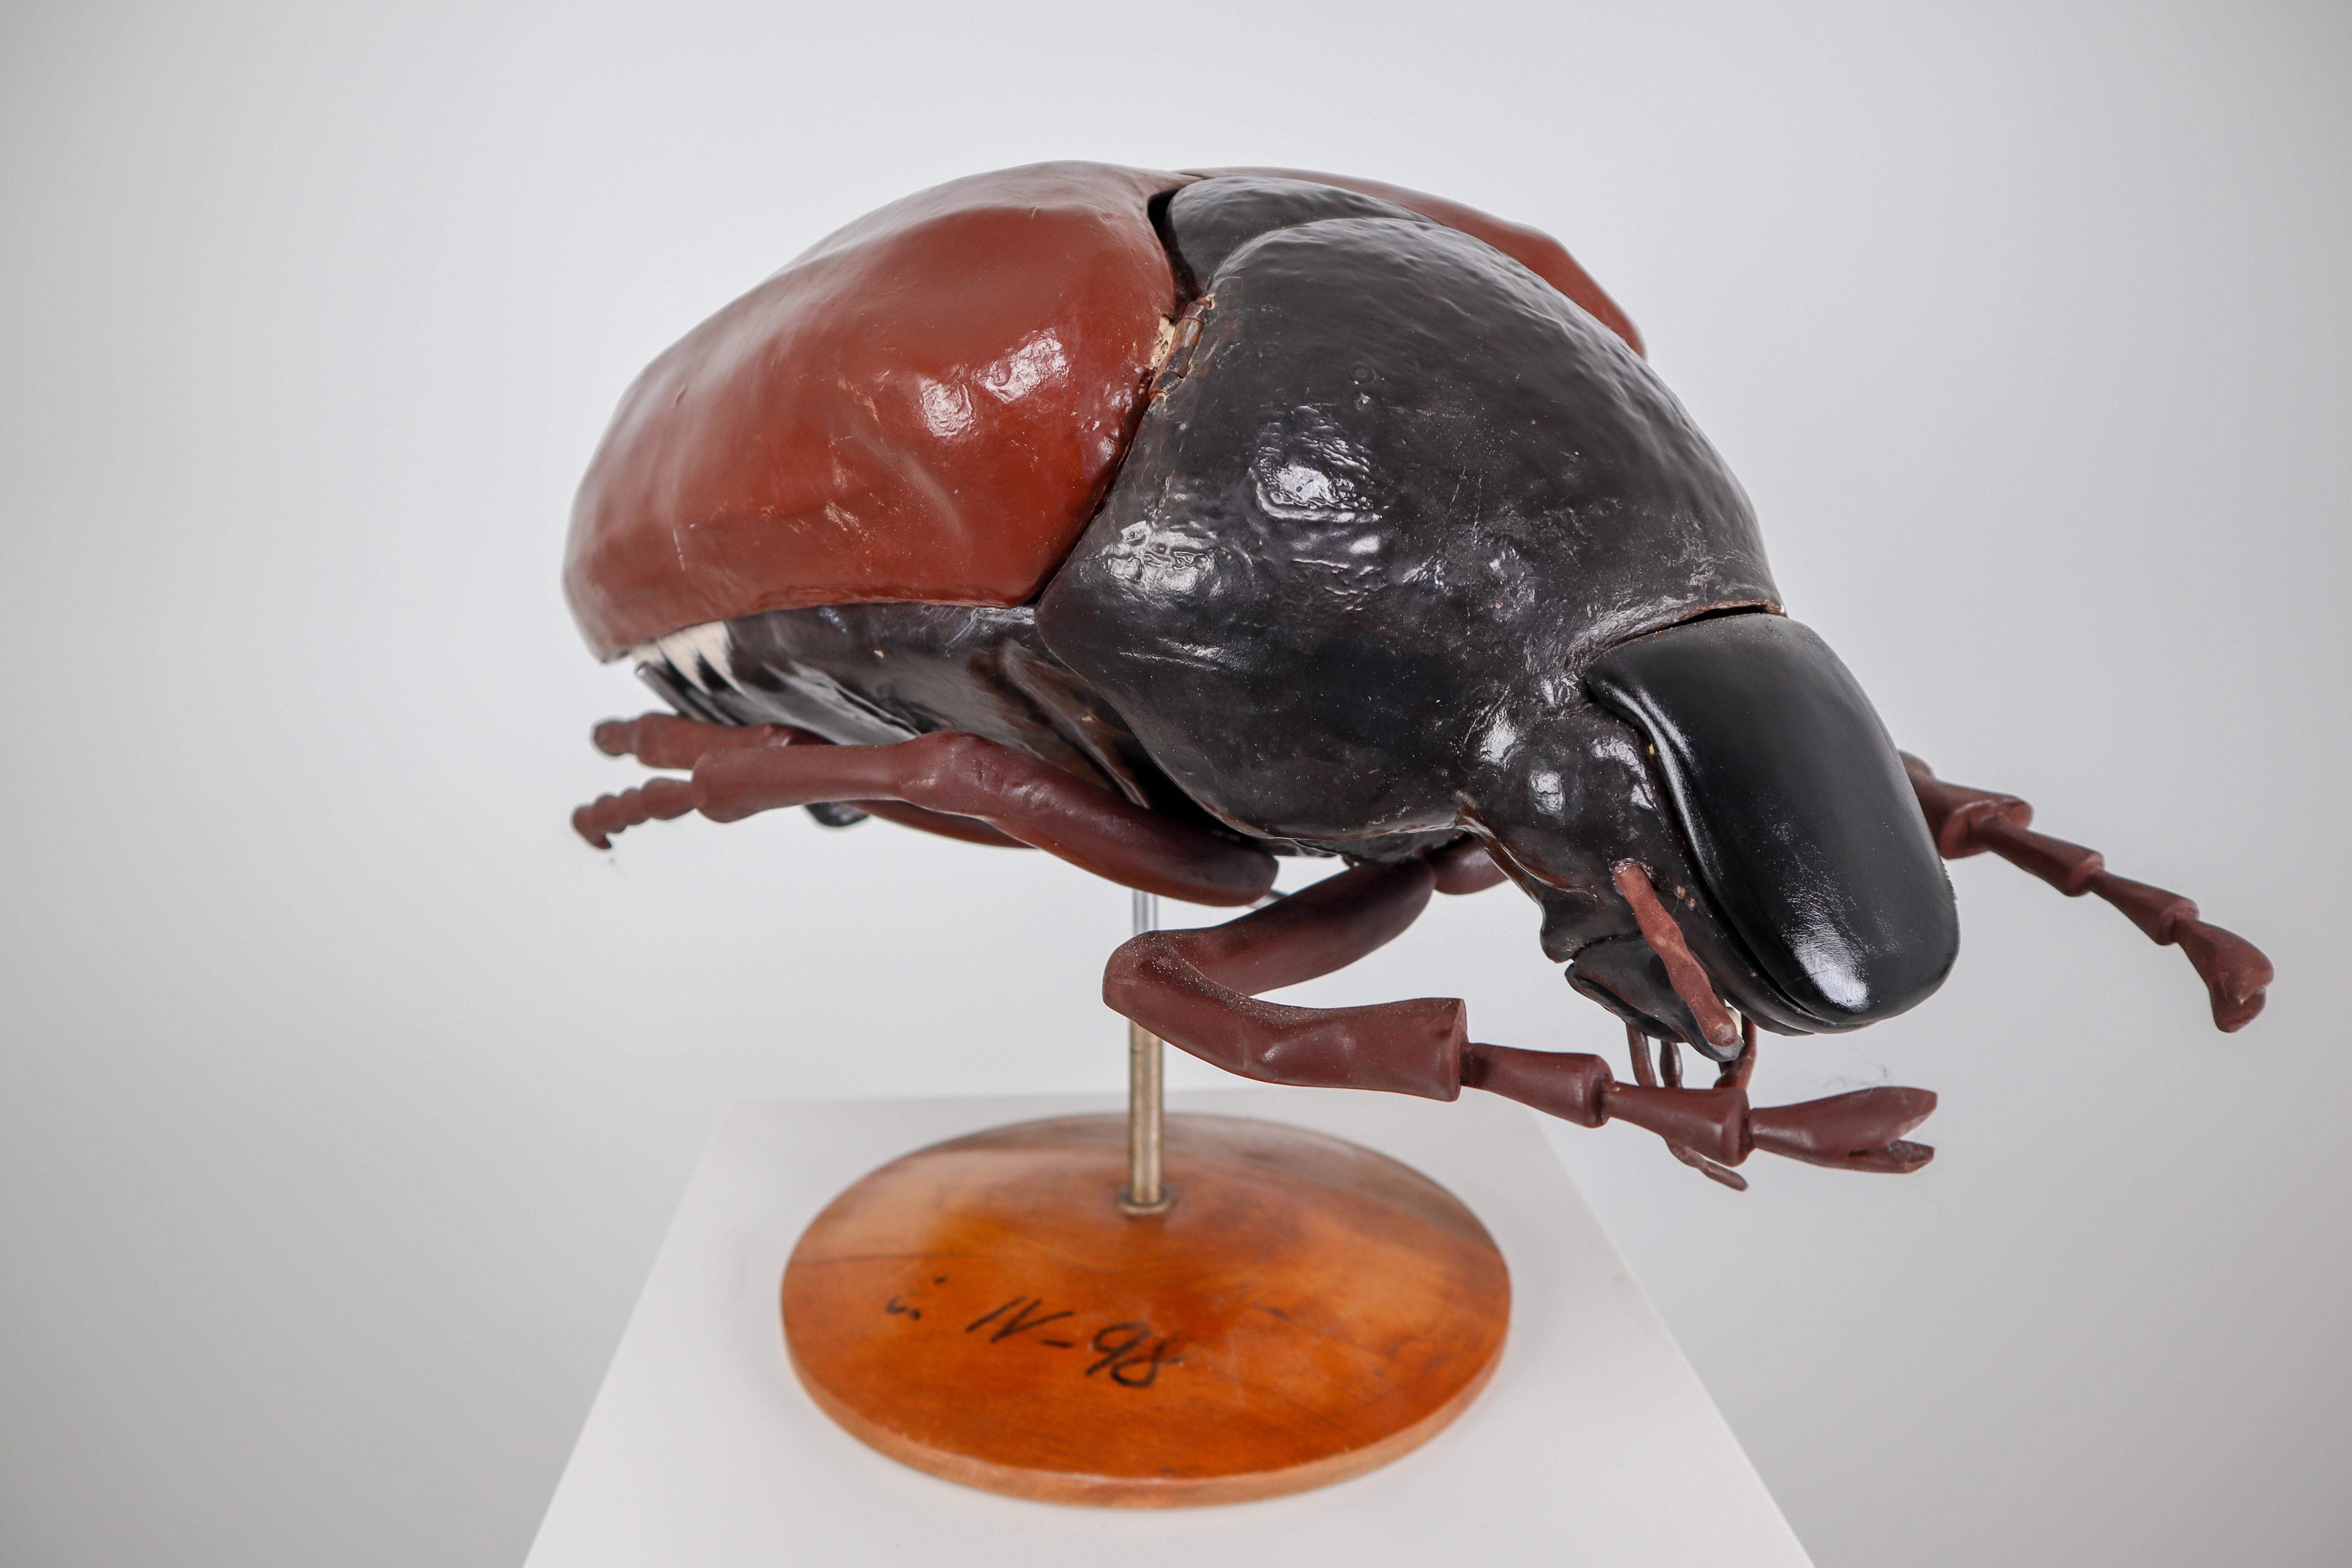 Czech Midcentury Large Early Anatomical Model of a Flying Beetle, Praque, 1950s